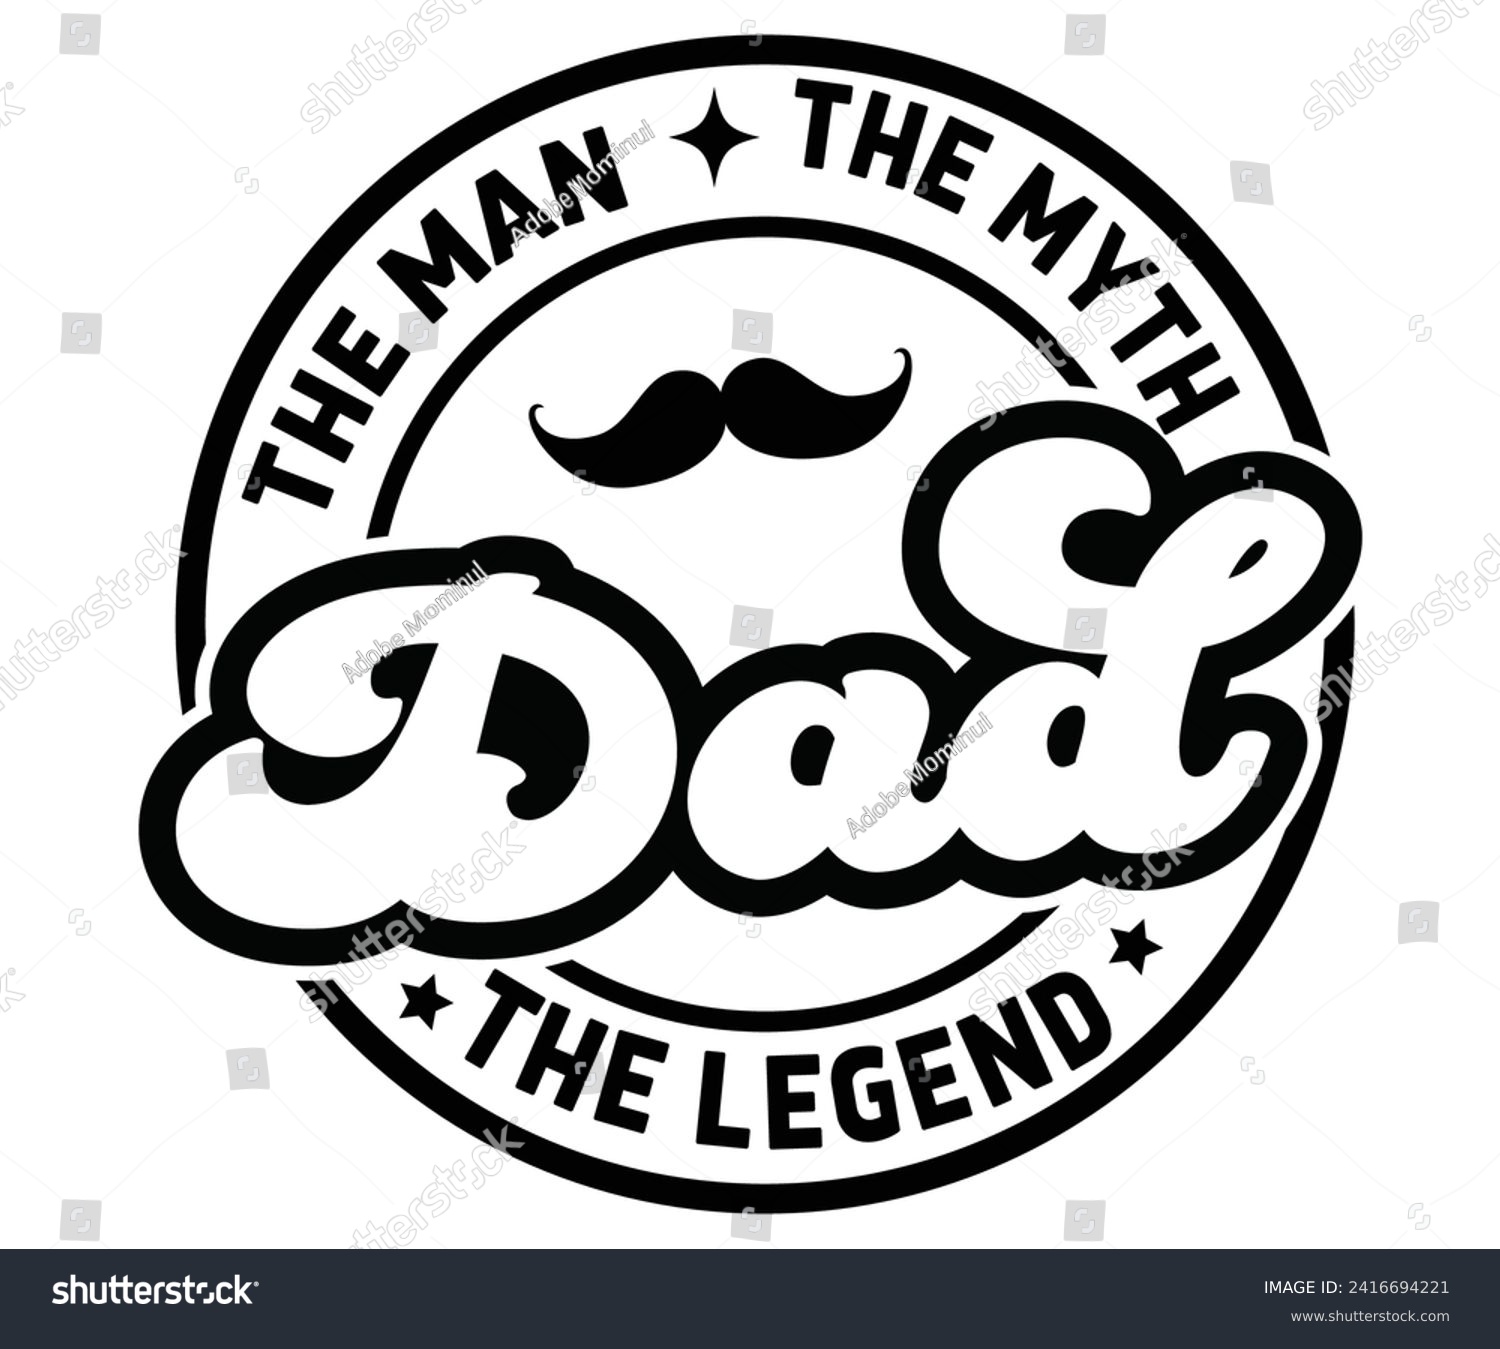 SVG of Dad The Man The Myth The Legend svg,Father's Day Svg,Papa svg,Grandpa Svg,Father's Day Saying Qoutes,Dad Svg,Funny Father, Gift For Dad Svg,Daddy Svg,Family Svg,T shirt Design,Svg Cut File,Typography. svg